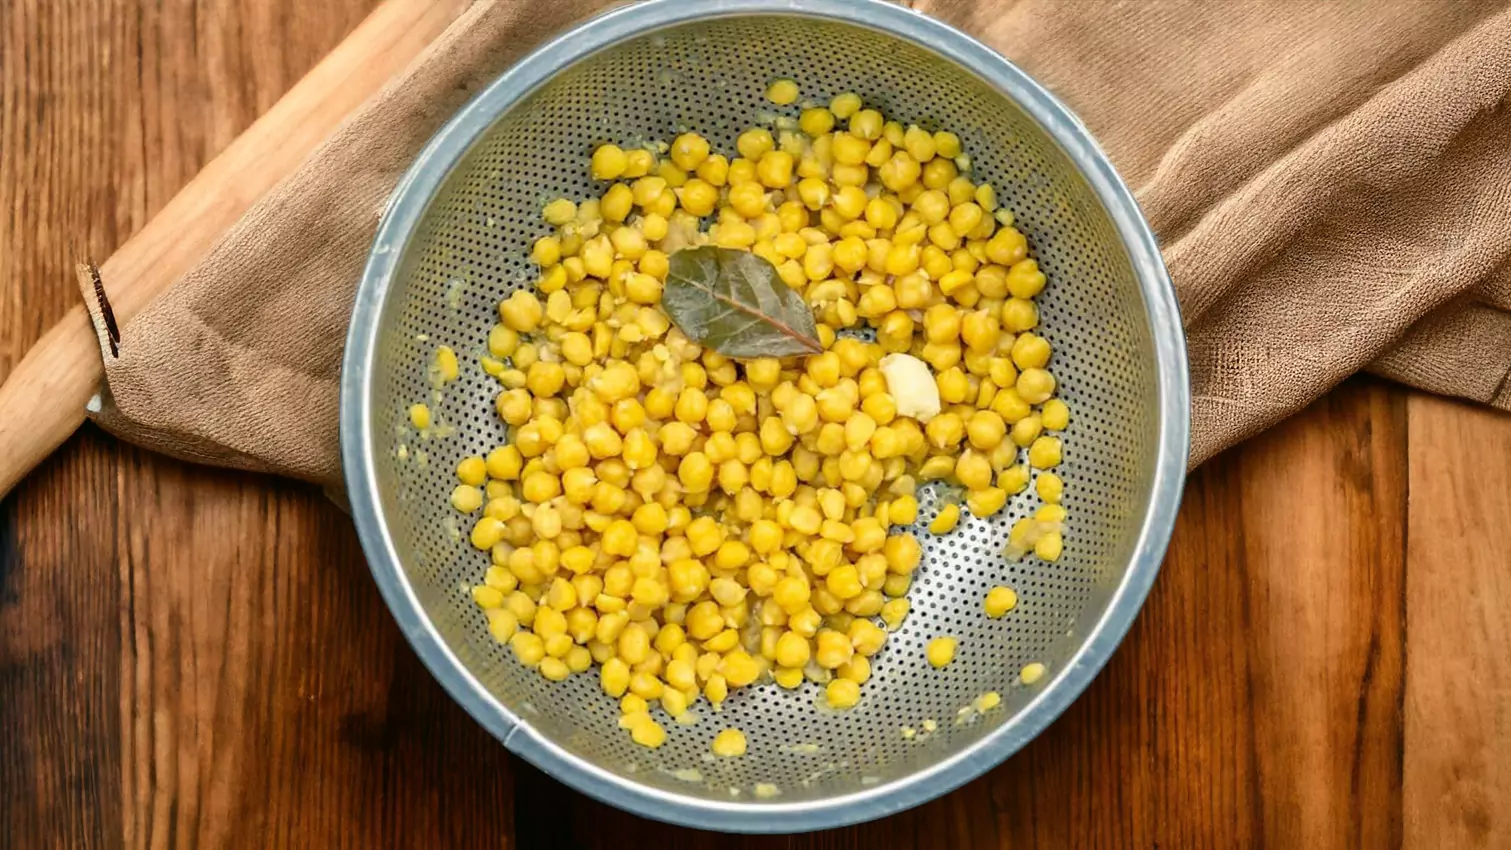 Cooking Chickpeas in a Pressure Cooker